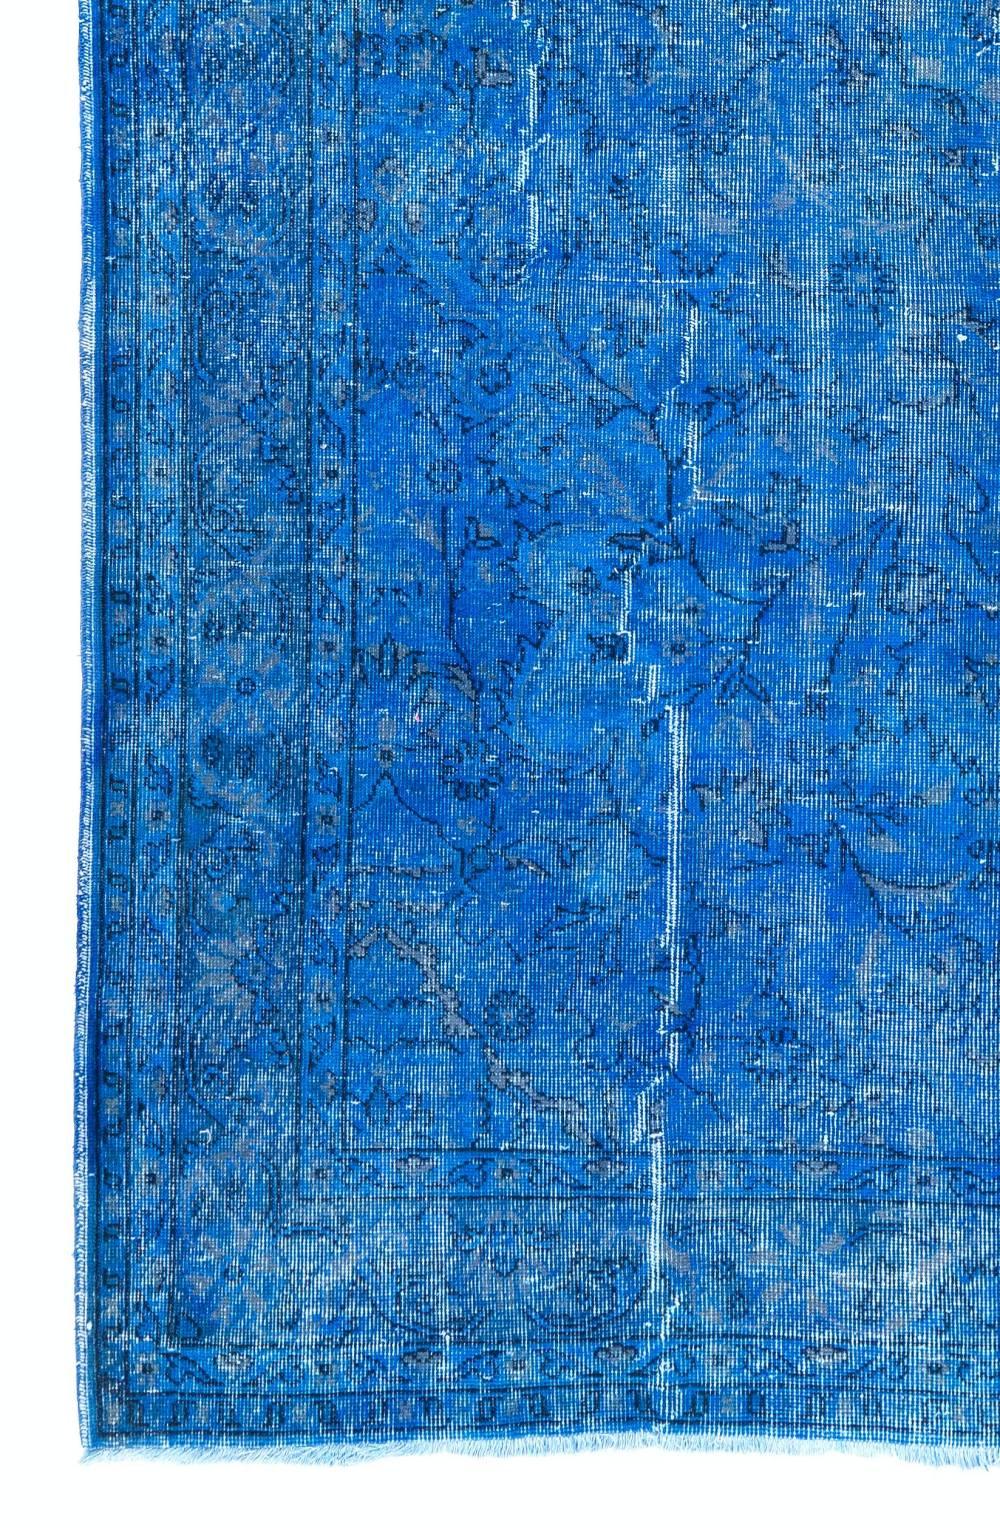 Hand-Woven 7x11 Ft Cerulean Blue Color Overdyed Vintage Turkish Rug for Modern Interiors